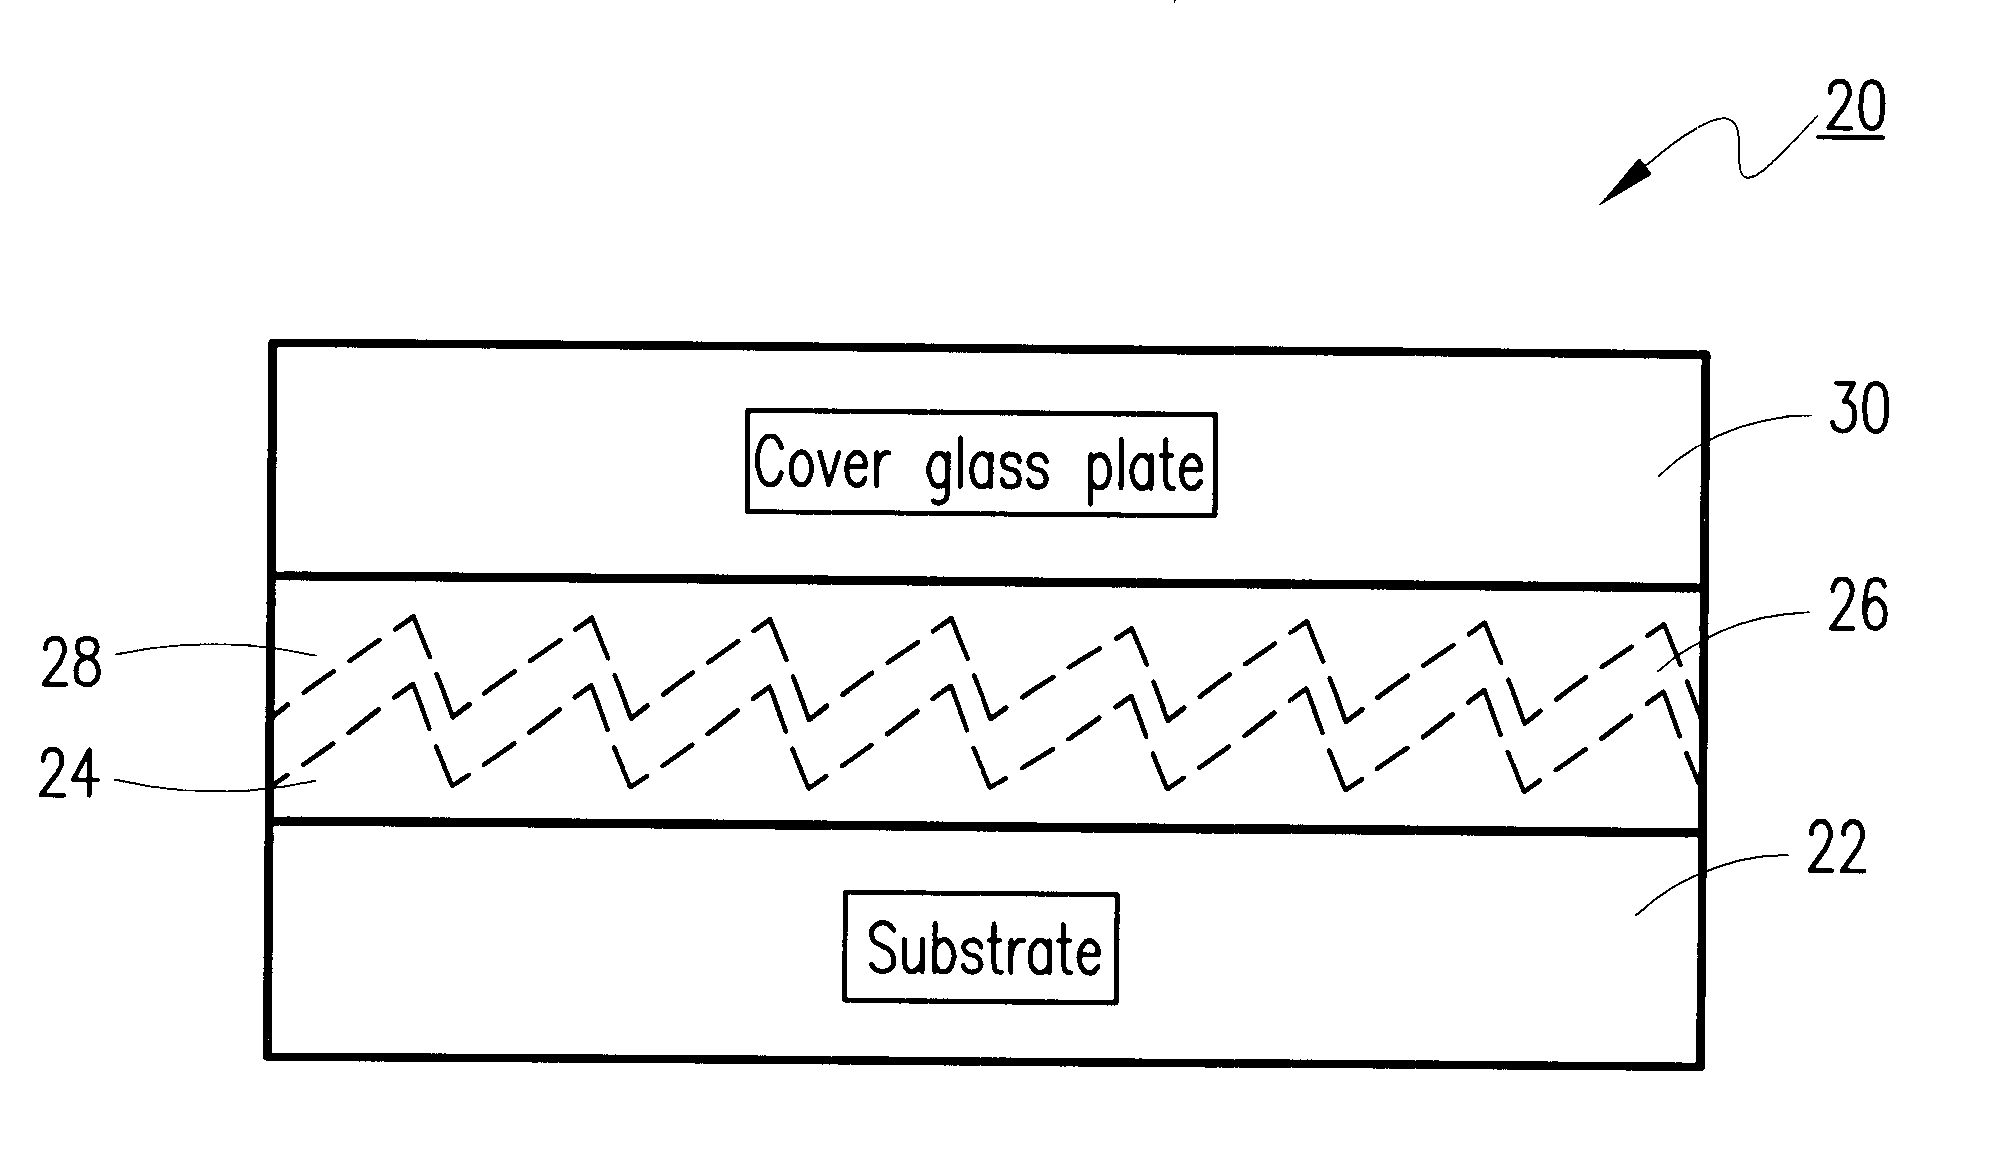 Diffraction grating for wavelength division multiplexing/demultiplexing devices